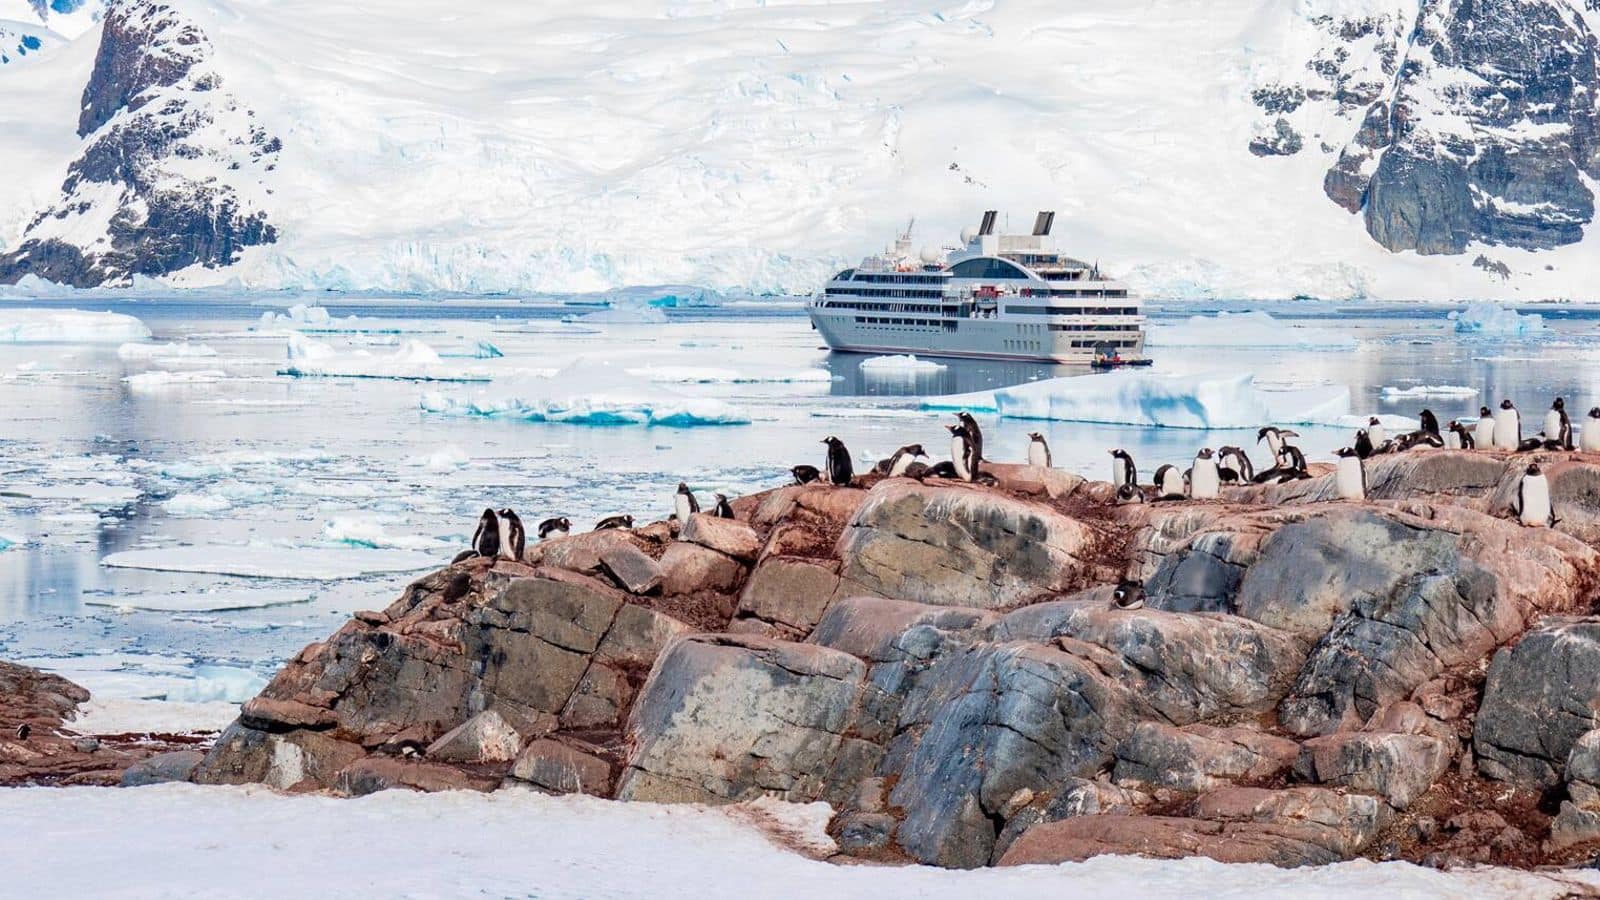 Antarctic expedition cruise: Journey to Earth's final frontier